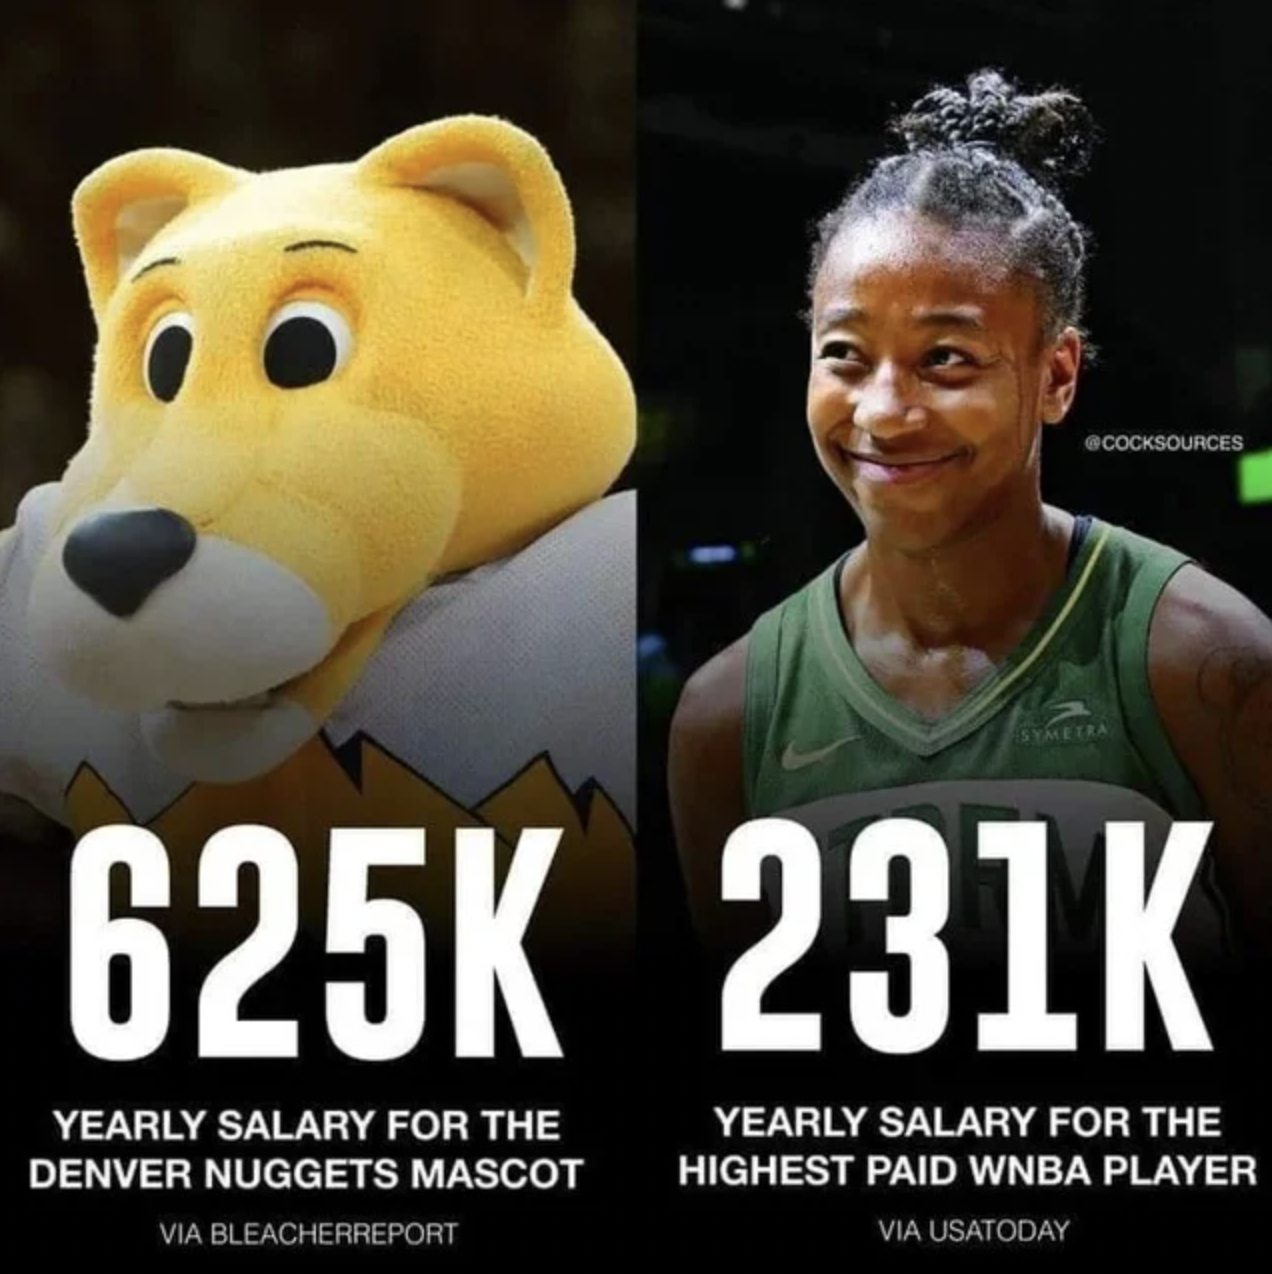 What's the bigger facepalm, the wage gap, or the WNBA?